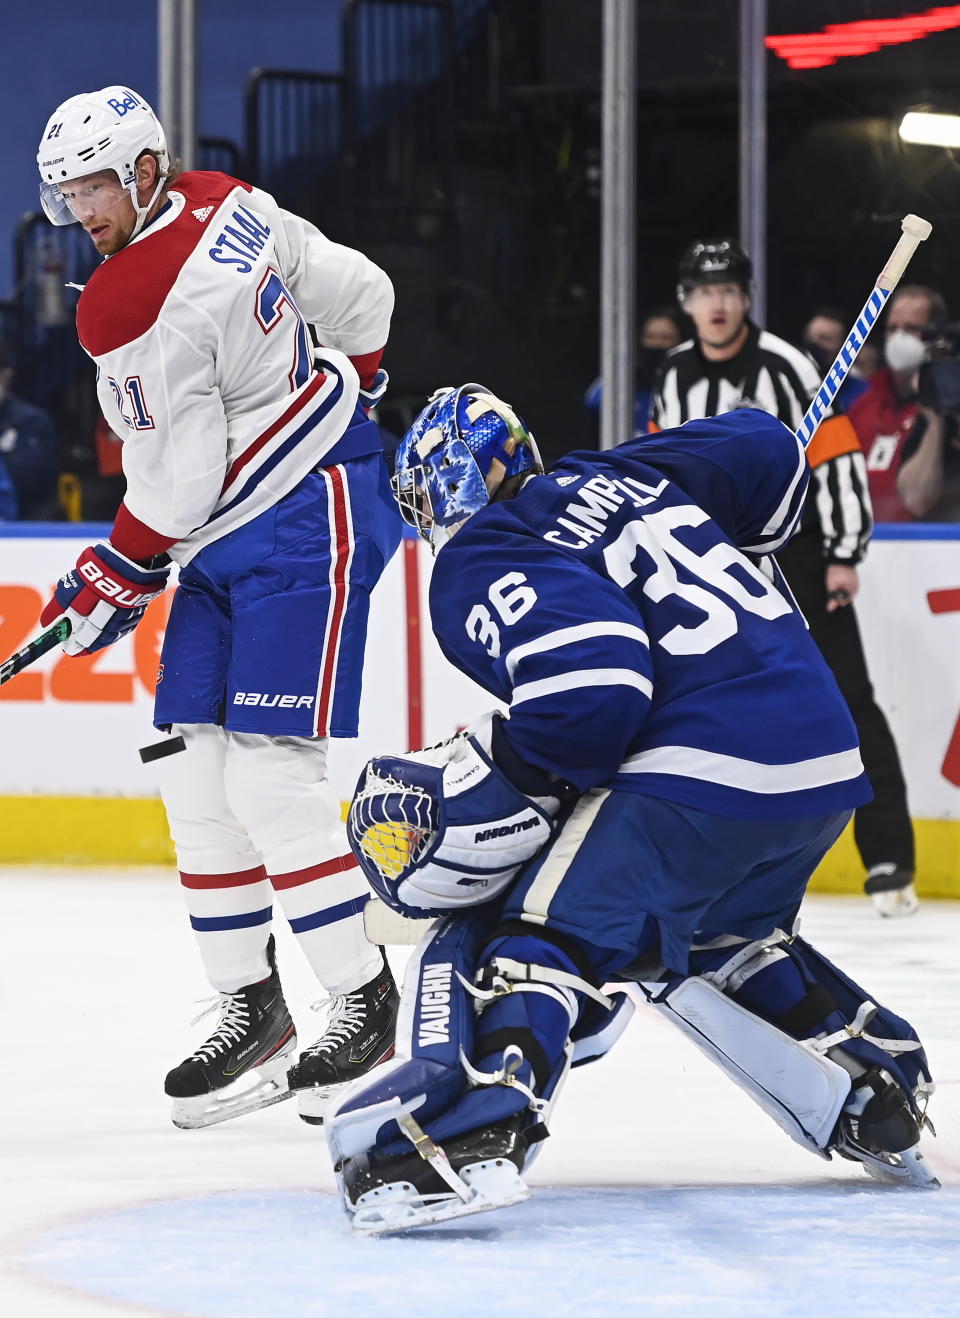 Toronto Maple Leafs goaltender Jack Campbell (36) makes a save as Montreal Canadiens forward Eric Staal (21) looks for the rebound during the second period of an NHL hockey game Wednesday, April 7, 2021, in Toronto. (Nathan Denette/The Canadian Press via AP)